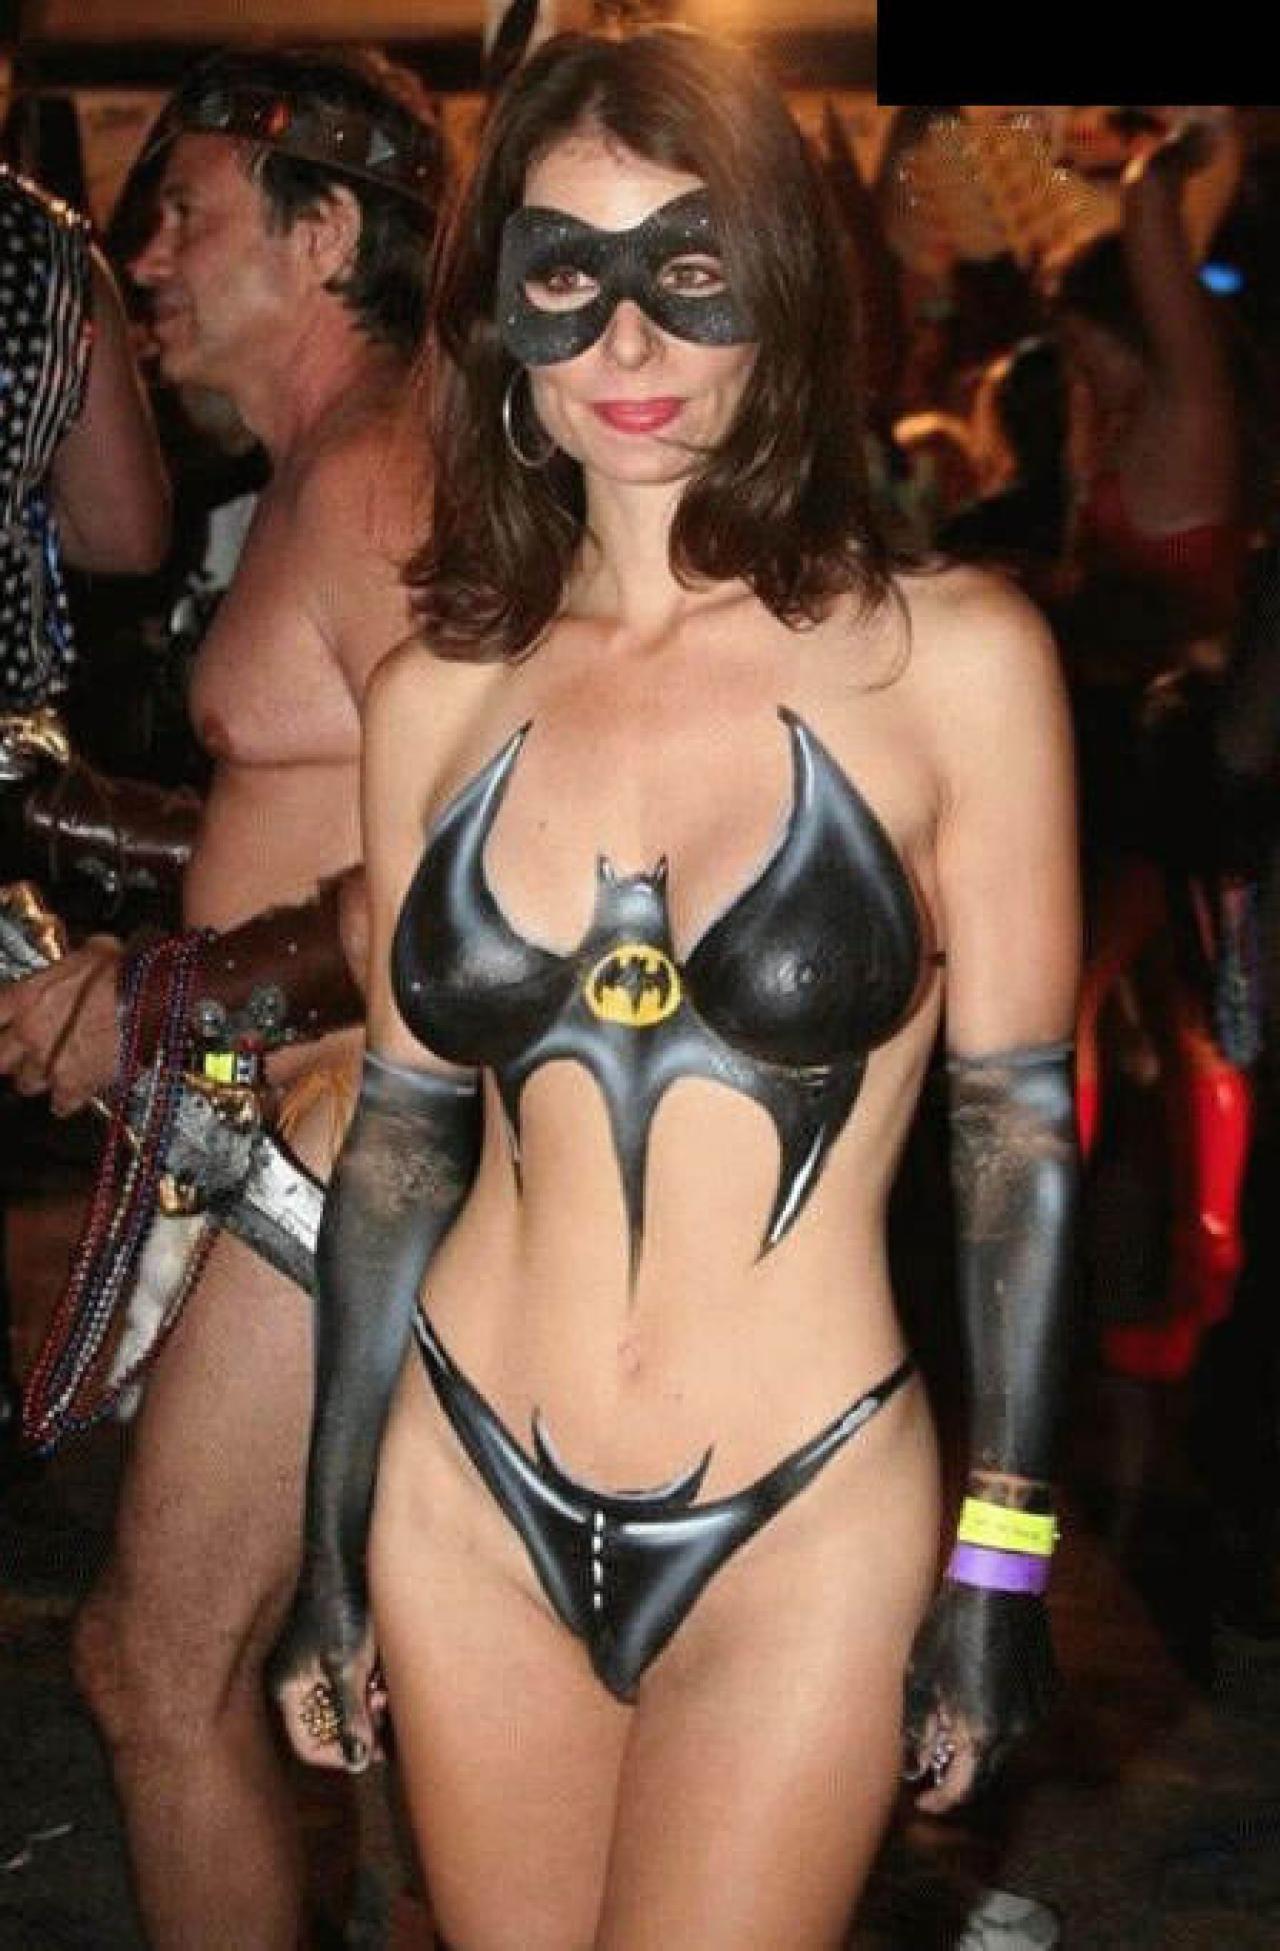 Count reccomend Pic of girls dressed like superheroes naked